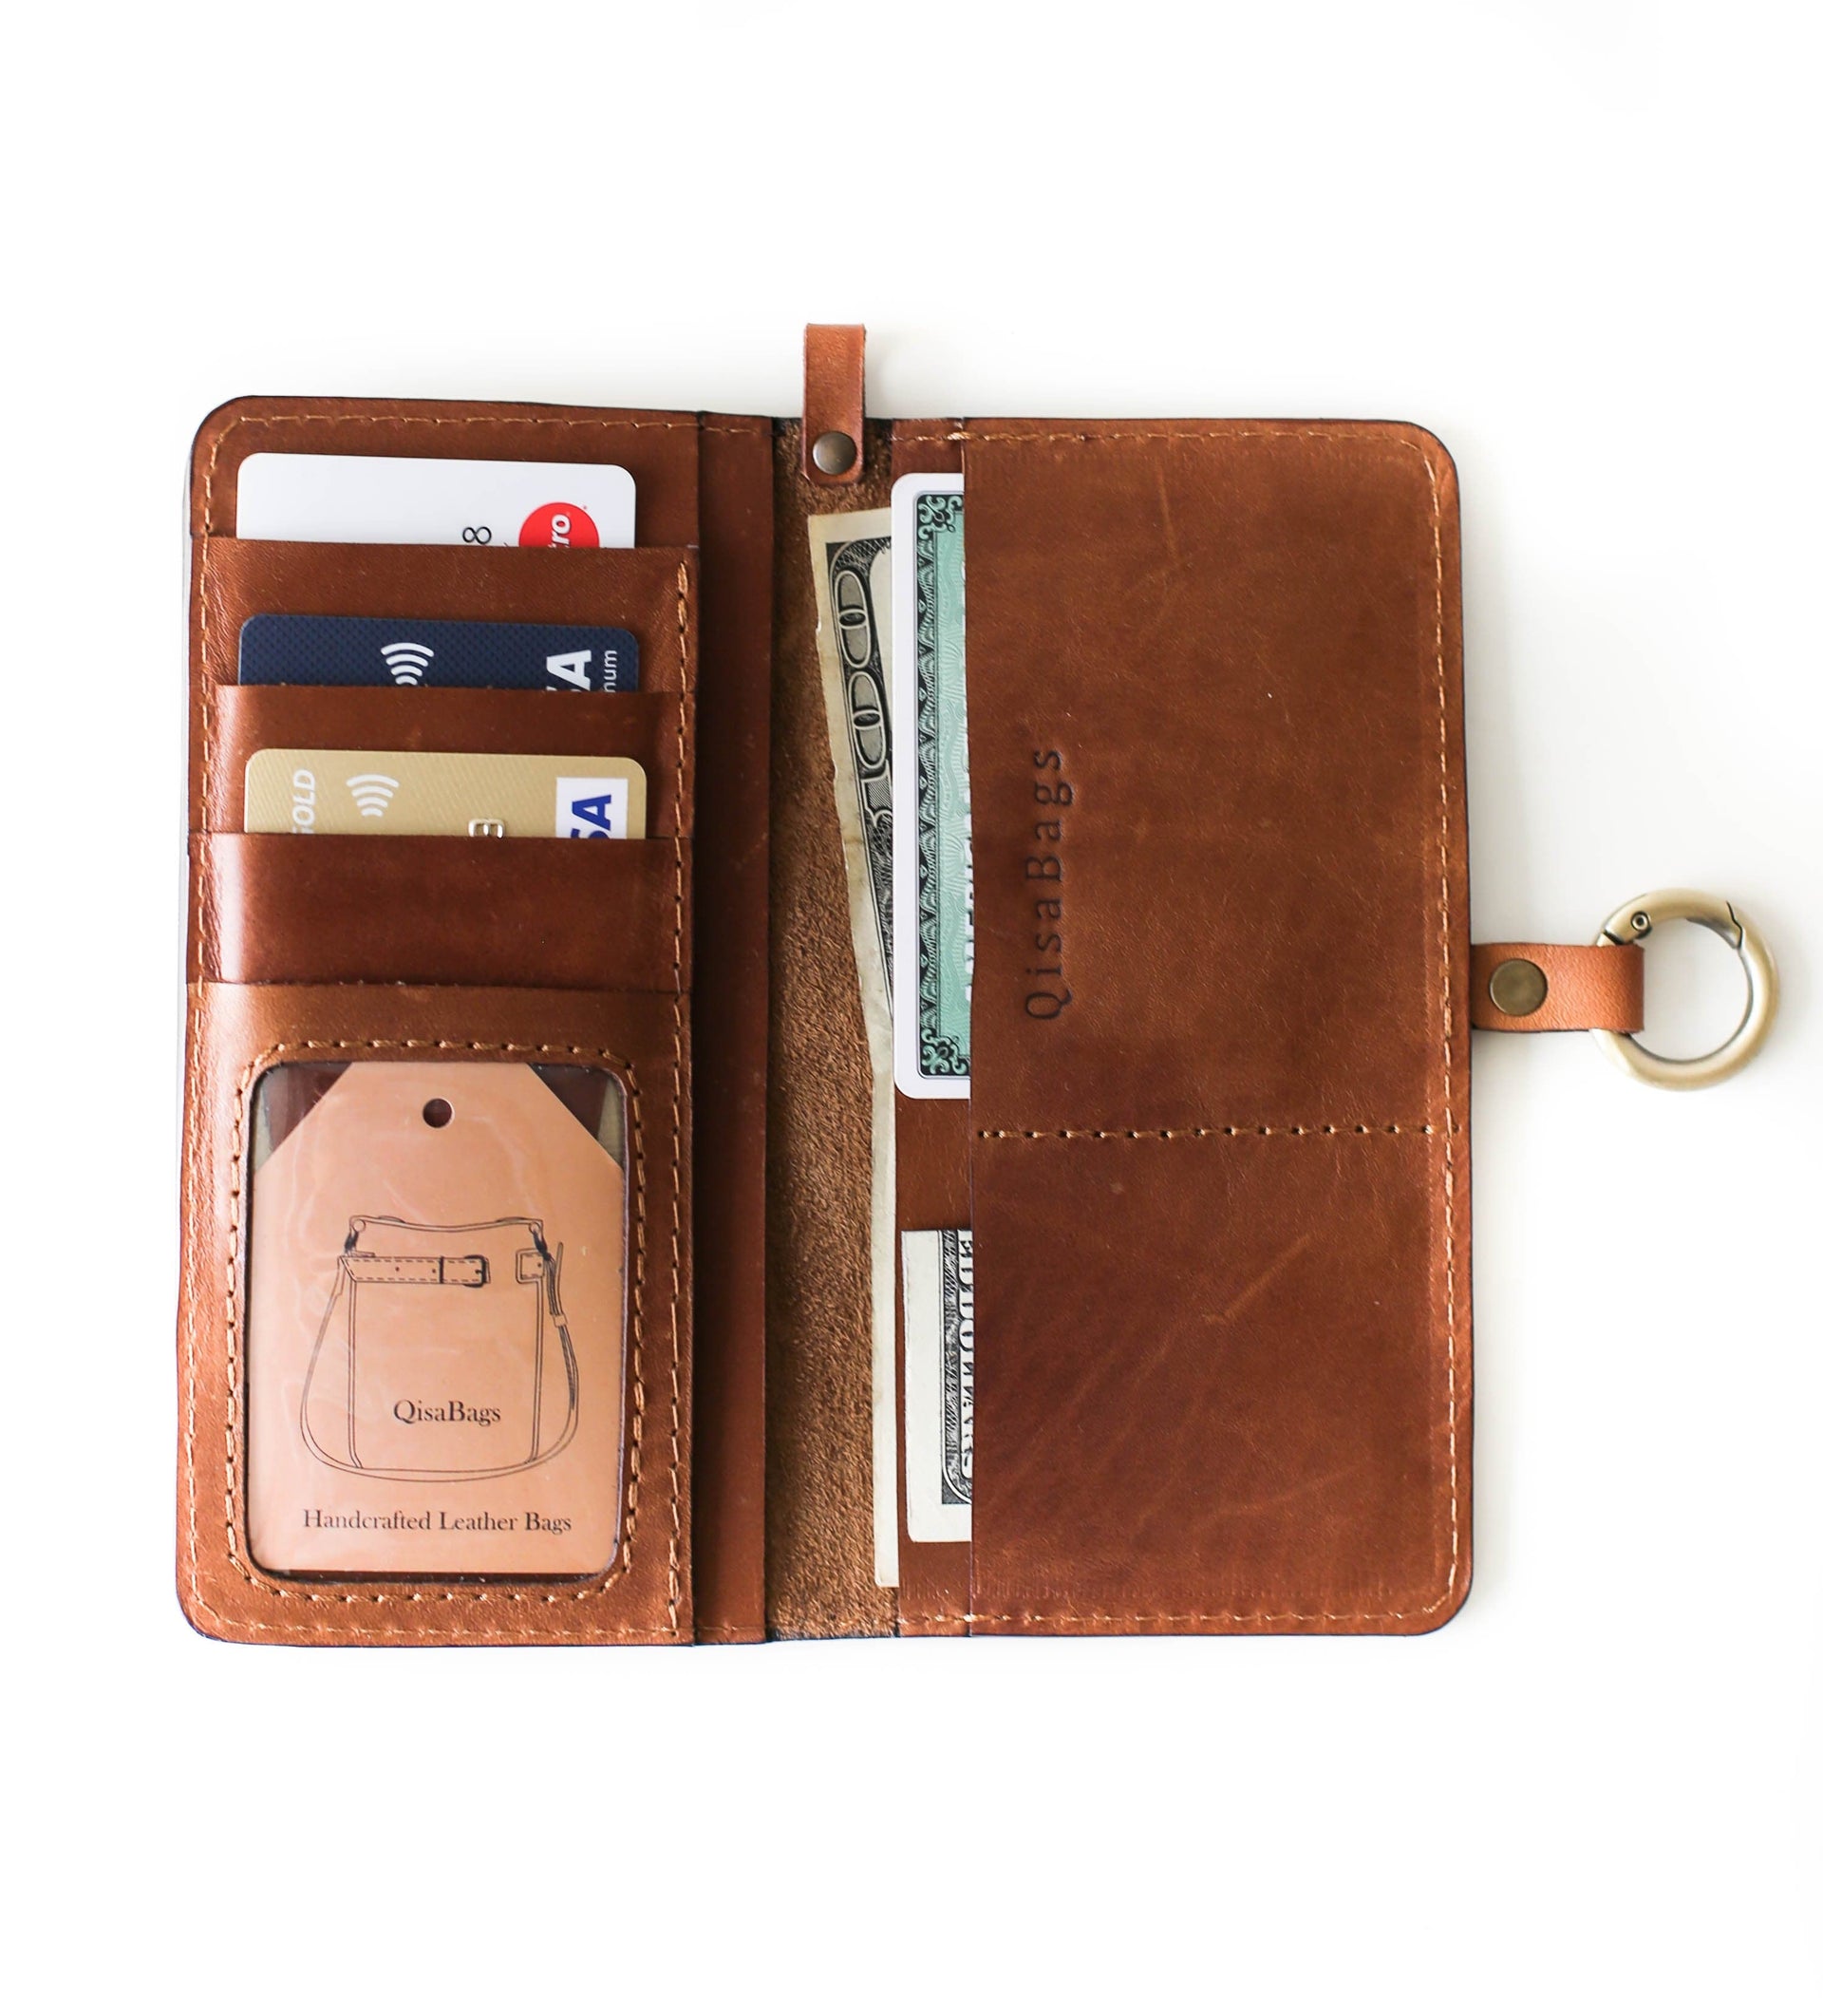 stylish brown leather wallet